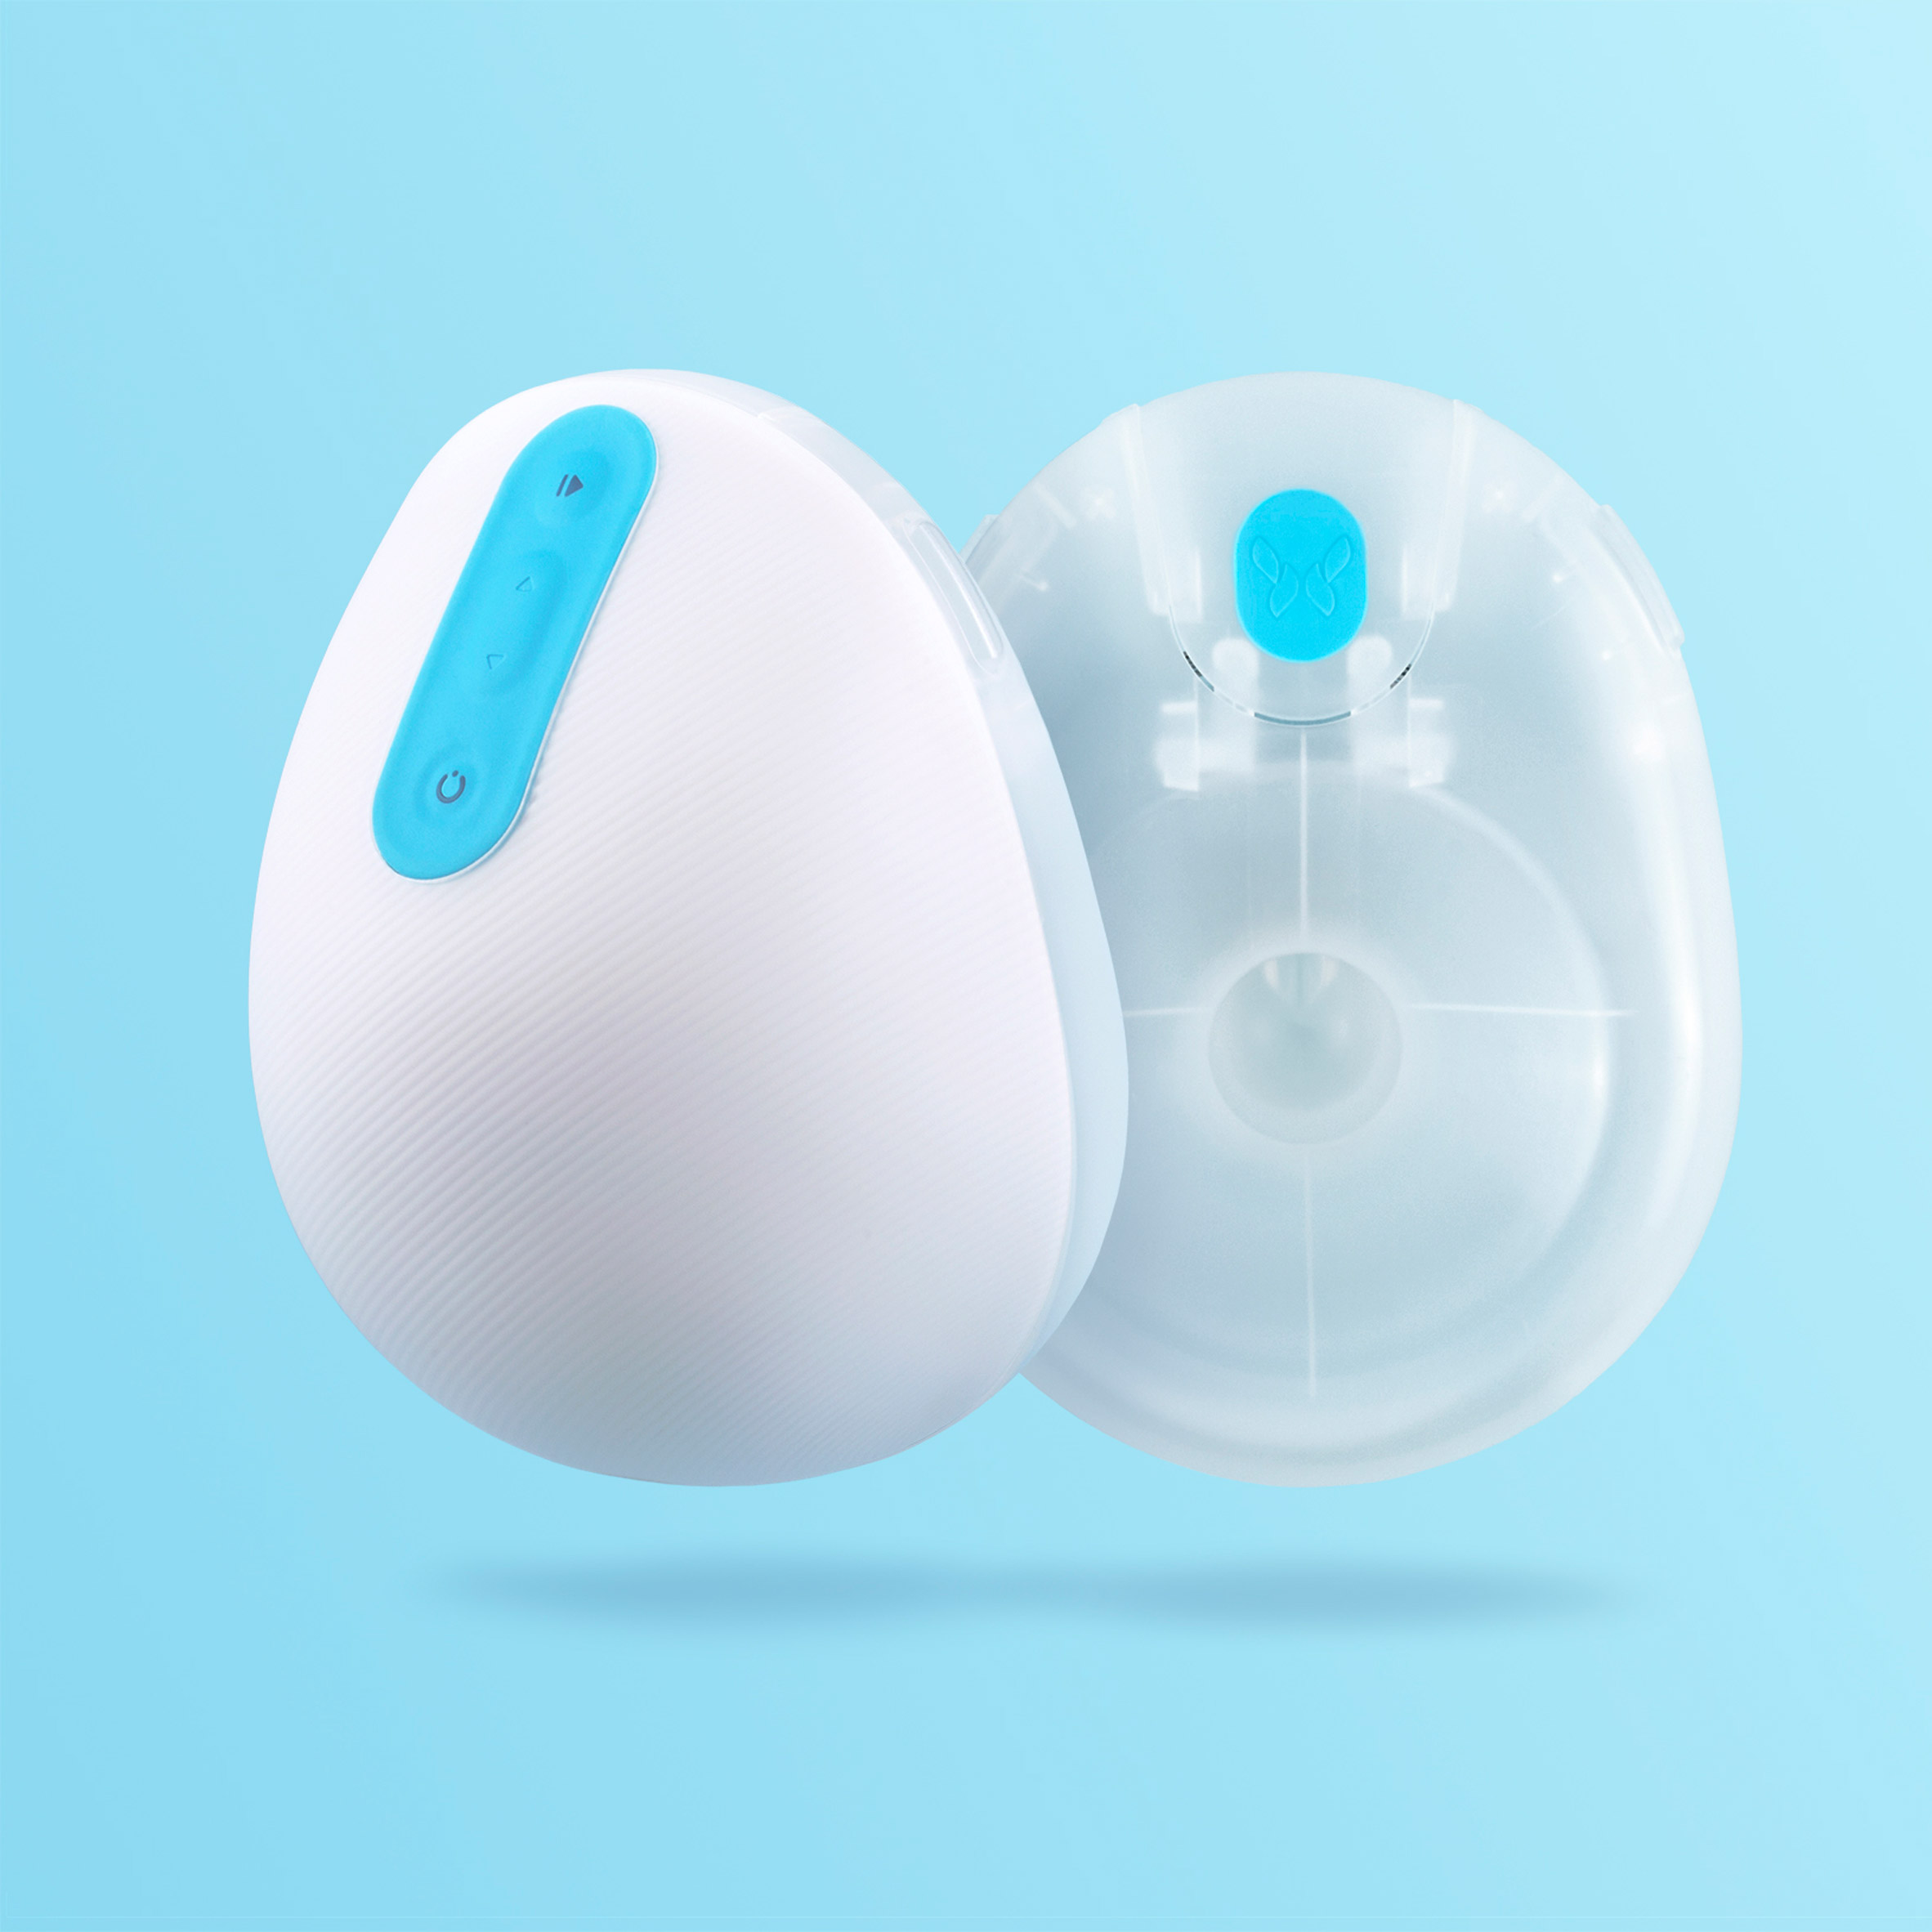 Willow S Wireless Breast Pump Allows Women To Express Milk On The Go